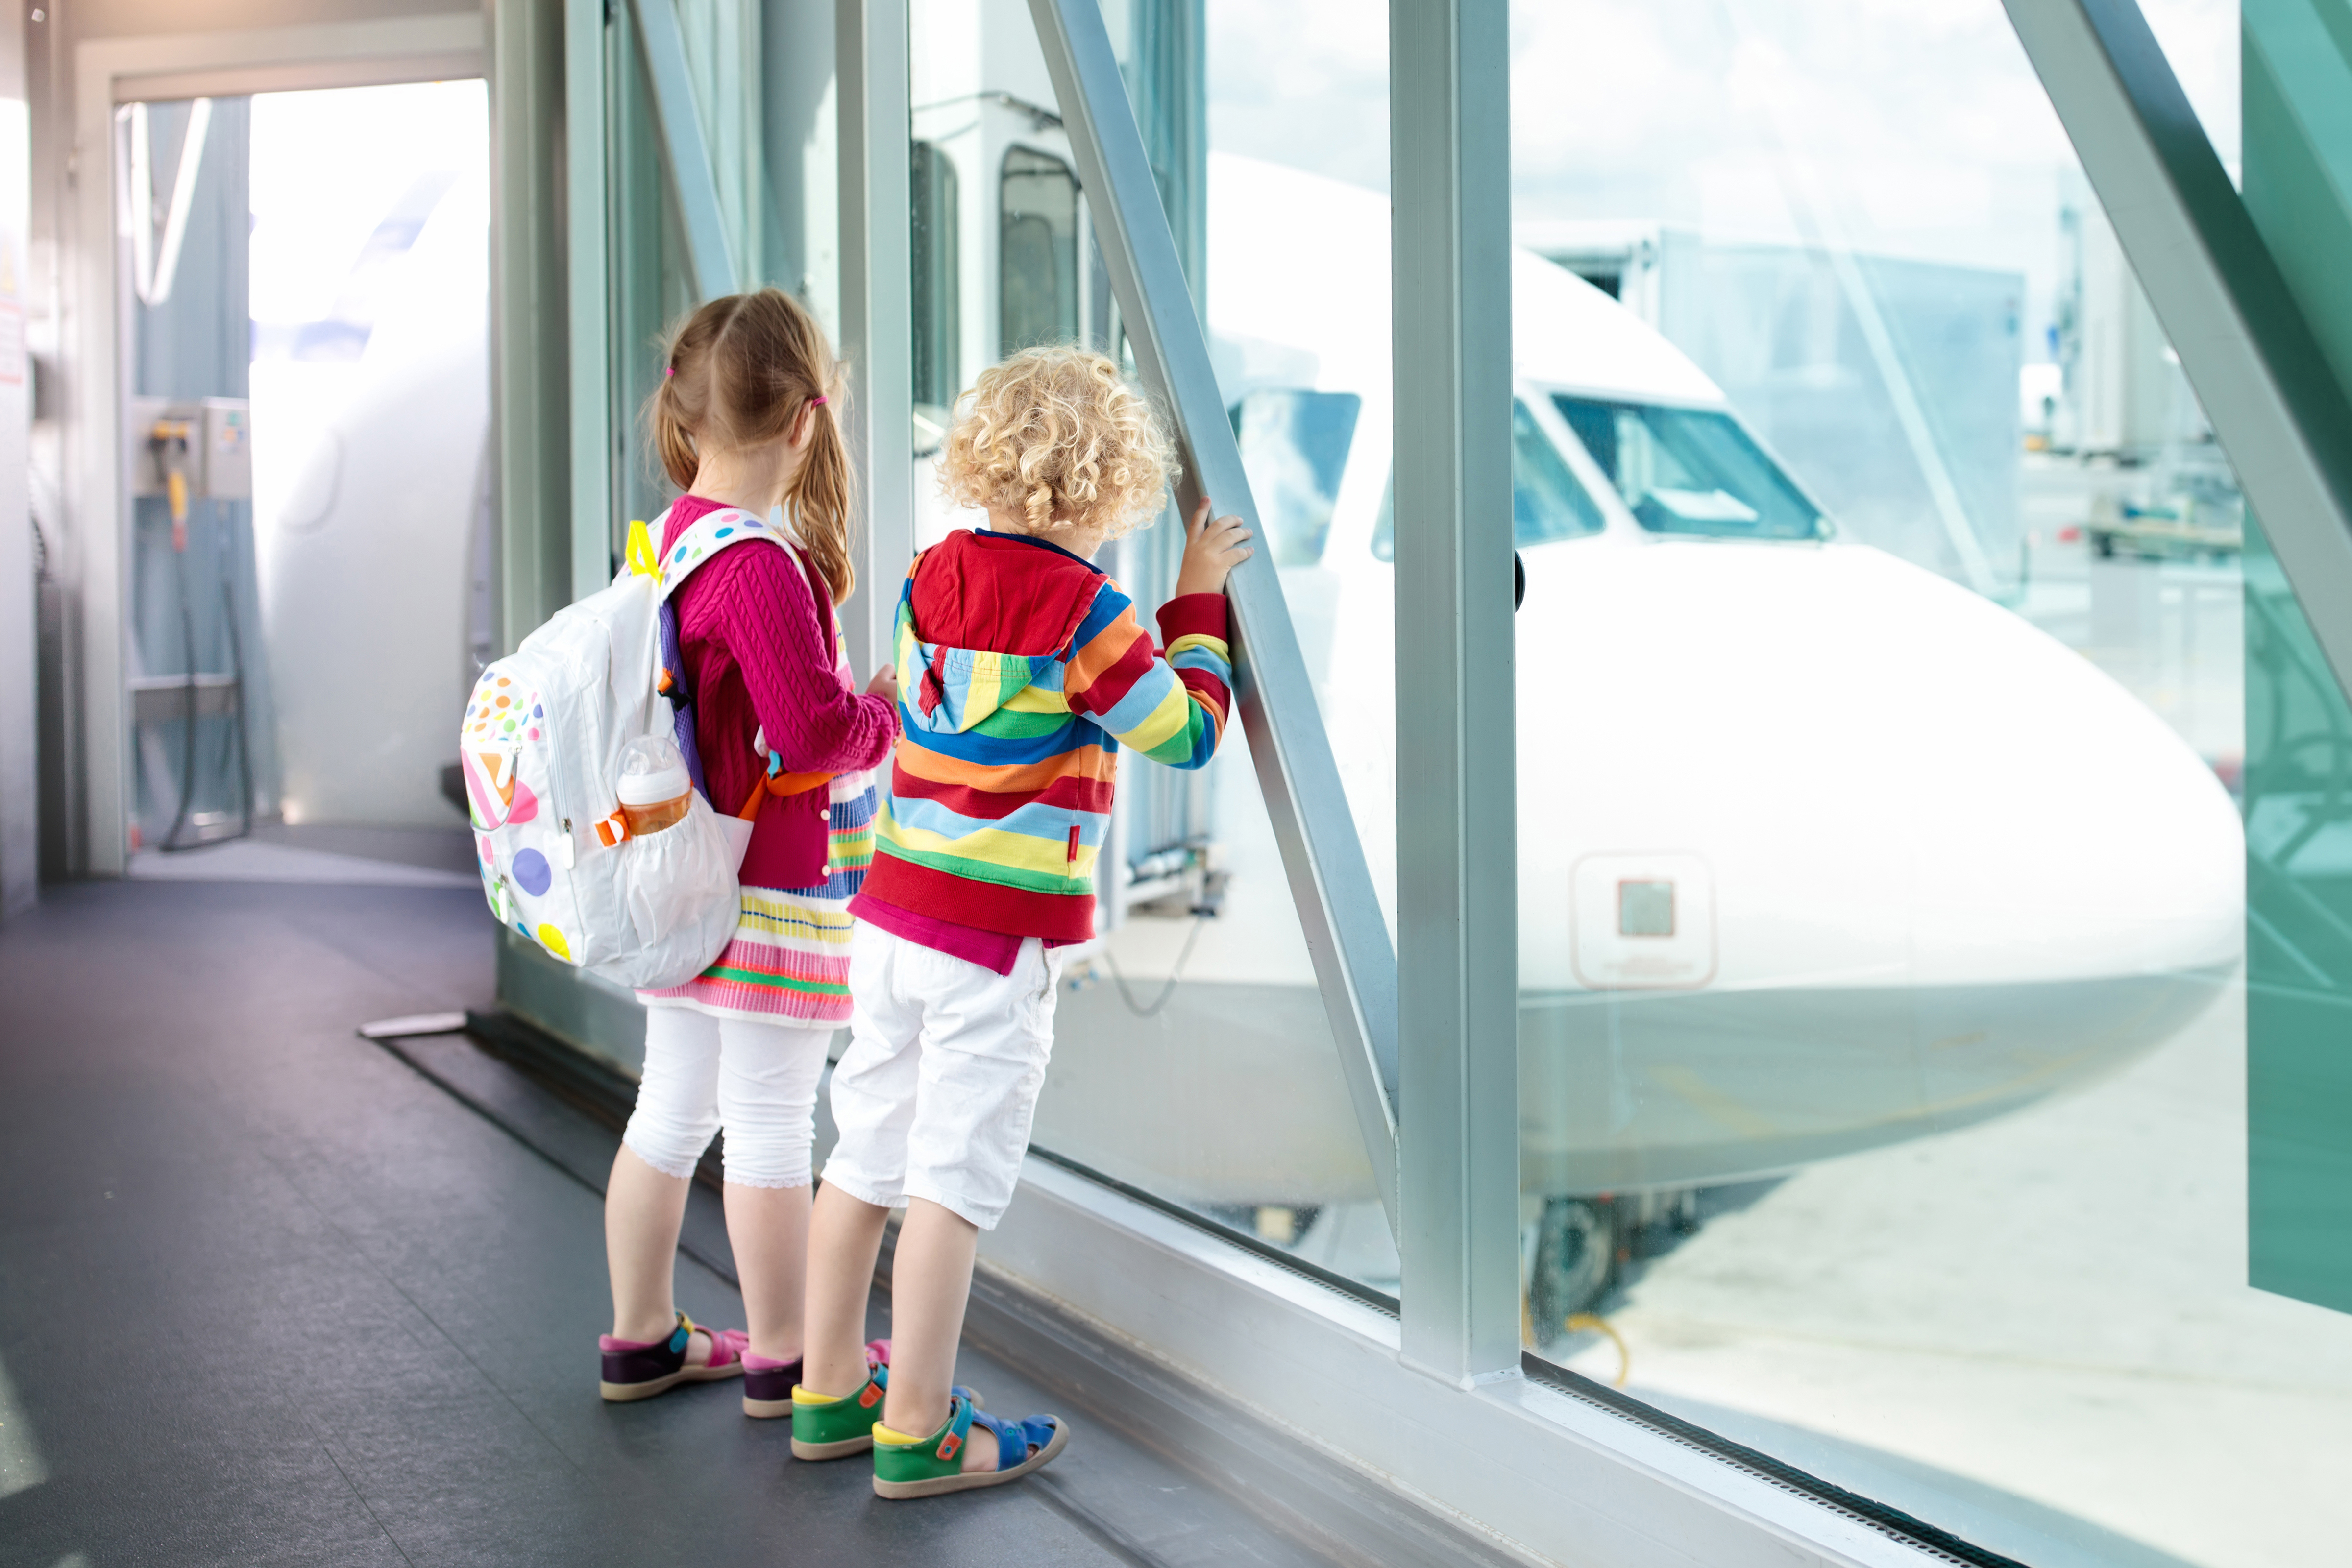 Children at the airport await parents who are undergoing Canadian visa checks